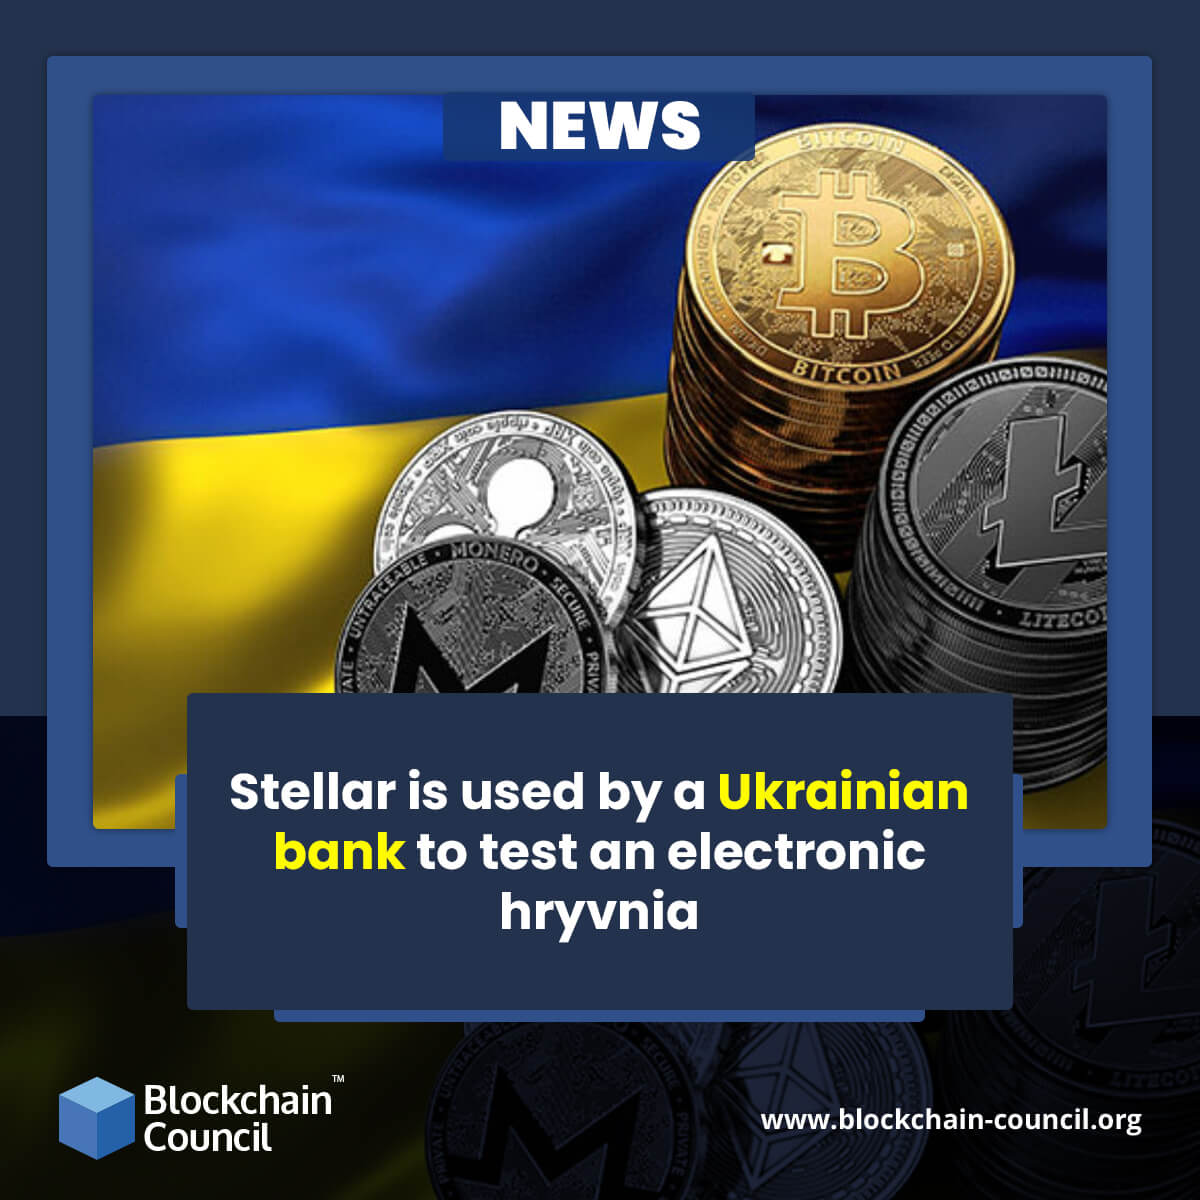 Stellar is used by a Ukrainian bank to test an electronic hryvnia